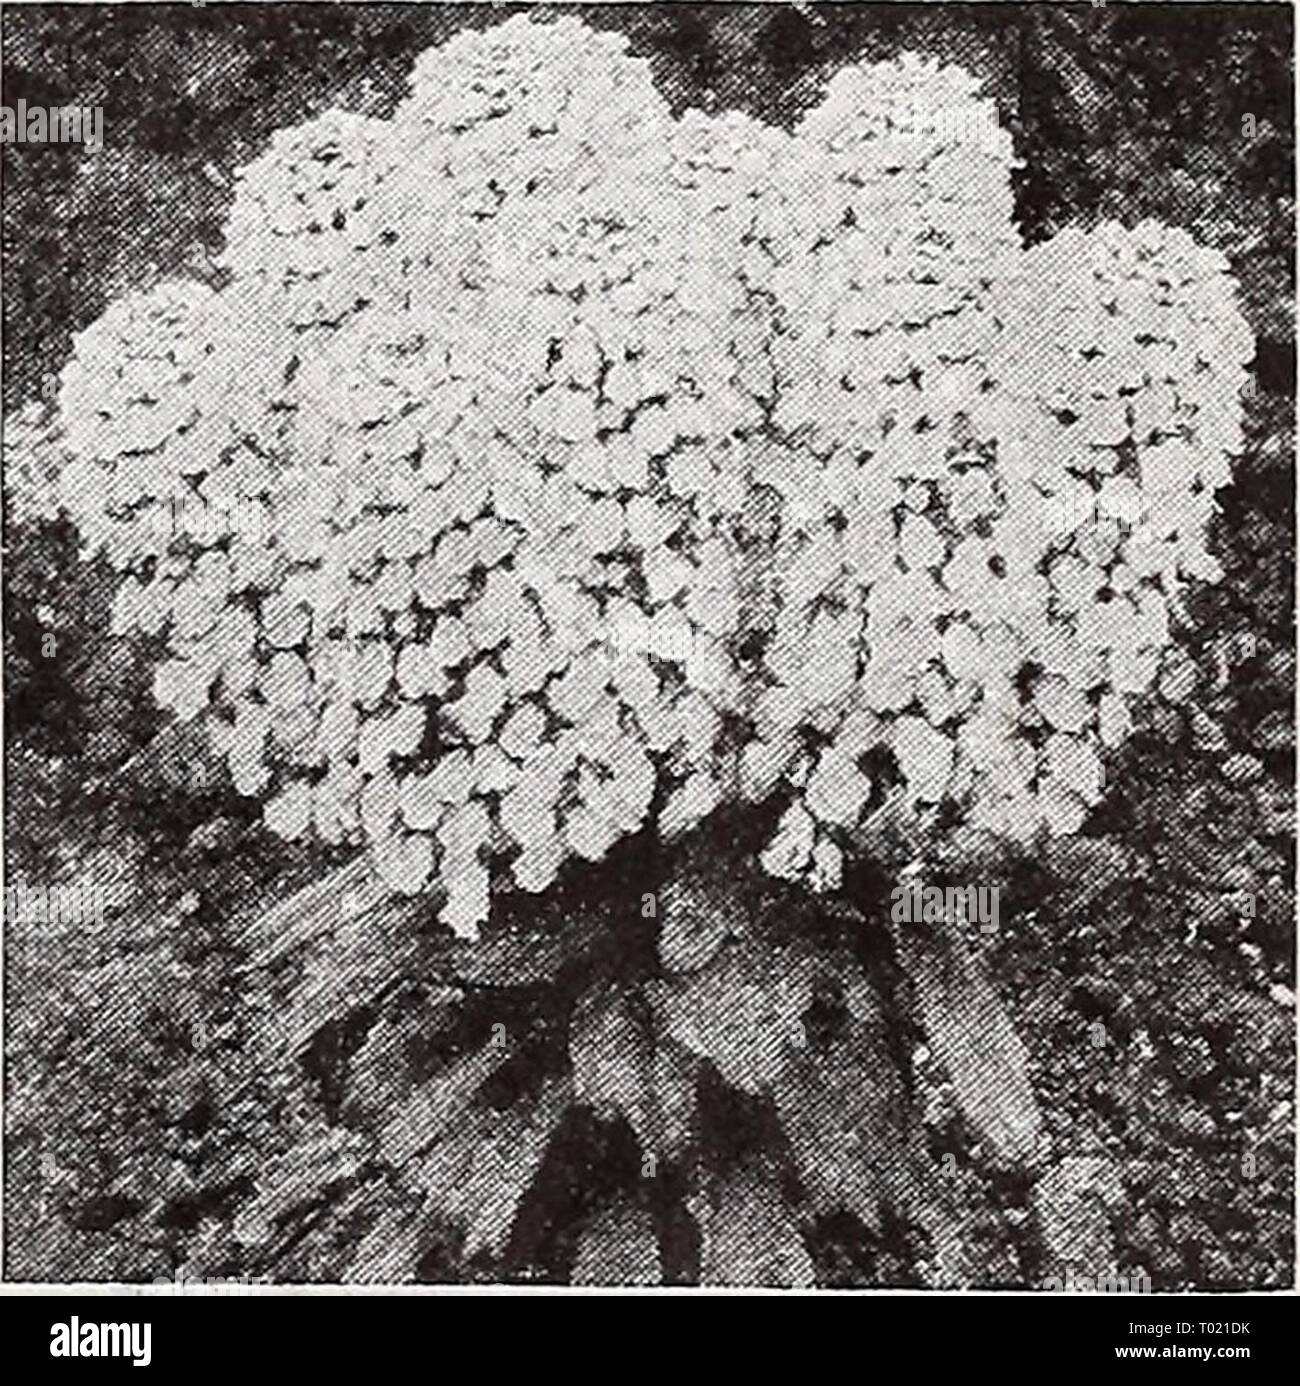 Dreer's garden book 1939 : 101 years of Dreer quality seeds plants bulbs . dreersgardenbook1939henr Year: 1939  Campanula persicifolia 1641 Persicifolia alba. The white- flowered Peach Bells. Pkt. 15c; special pkt. SOc. 1643 Persicifolia, Blue {Peach Bell). Undoubtedly one of the finest of the hardy BeUflowers. Grows 2 to 3 feet high and has large blue flowers. Pkt. 15c; special pkt. SOc. 1647 Persicifolia, Telham Beauty. Immense bell-shaped flowers of a pale China blue, produced on long stems. A very showy variety. Height, 2 feet. Pkt. 20c; special pkt. 60c. 1649 Pyramidalis alba. Showy white Stock Photo